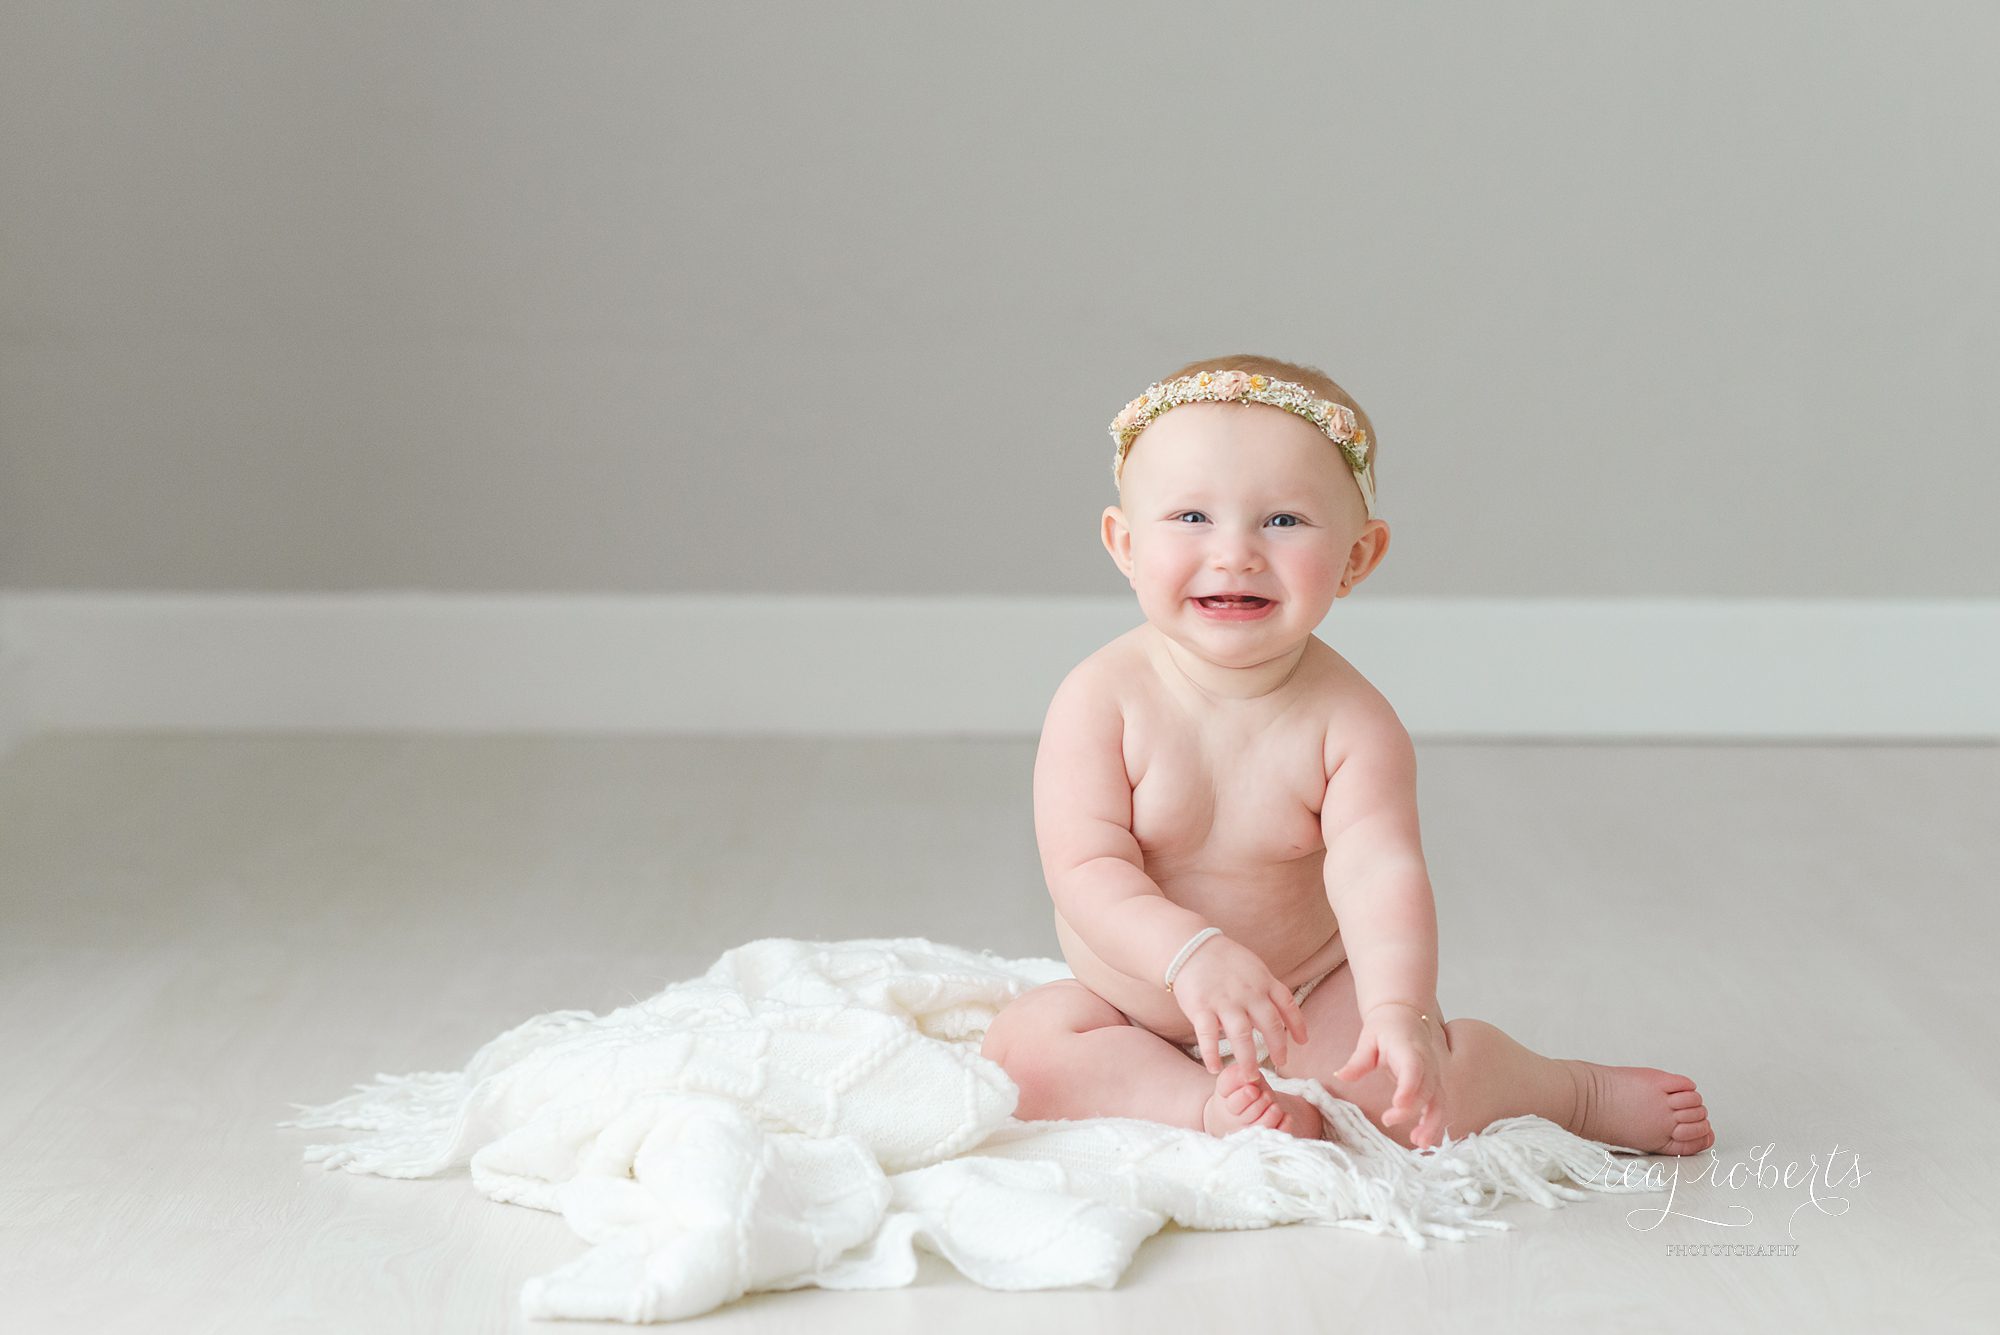 Simple first birthday photos baby girl smiling | Reaj Roberts Photography